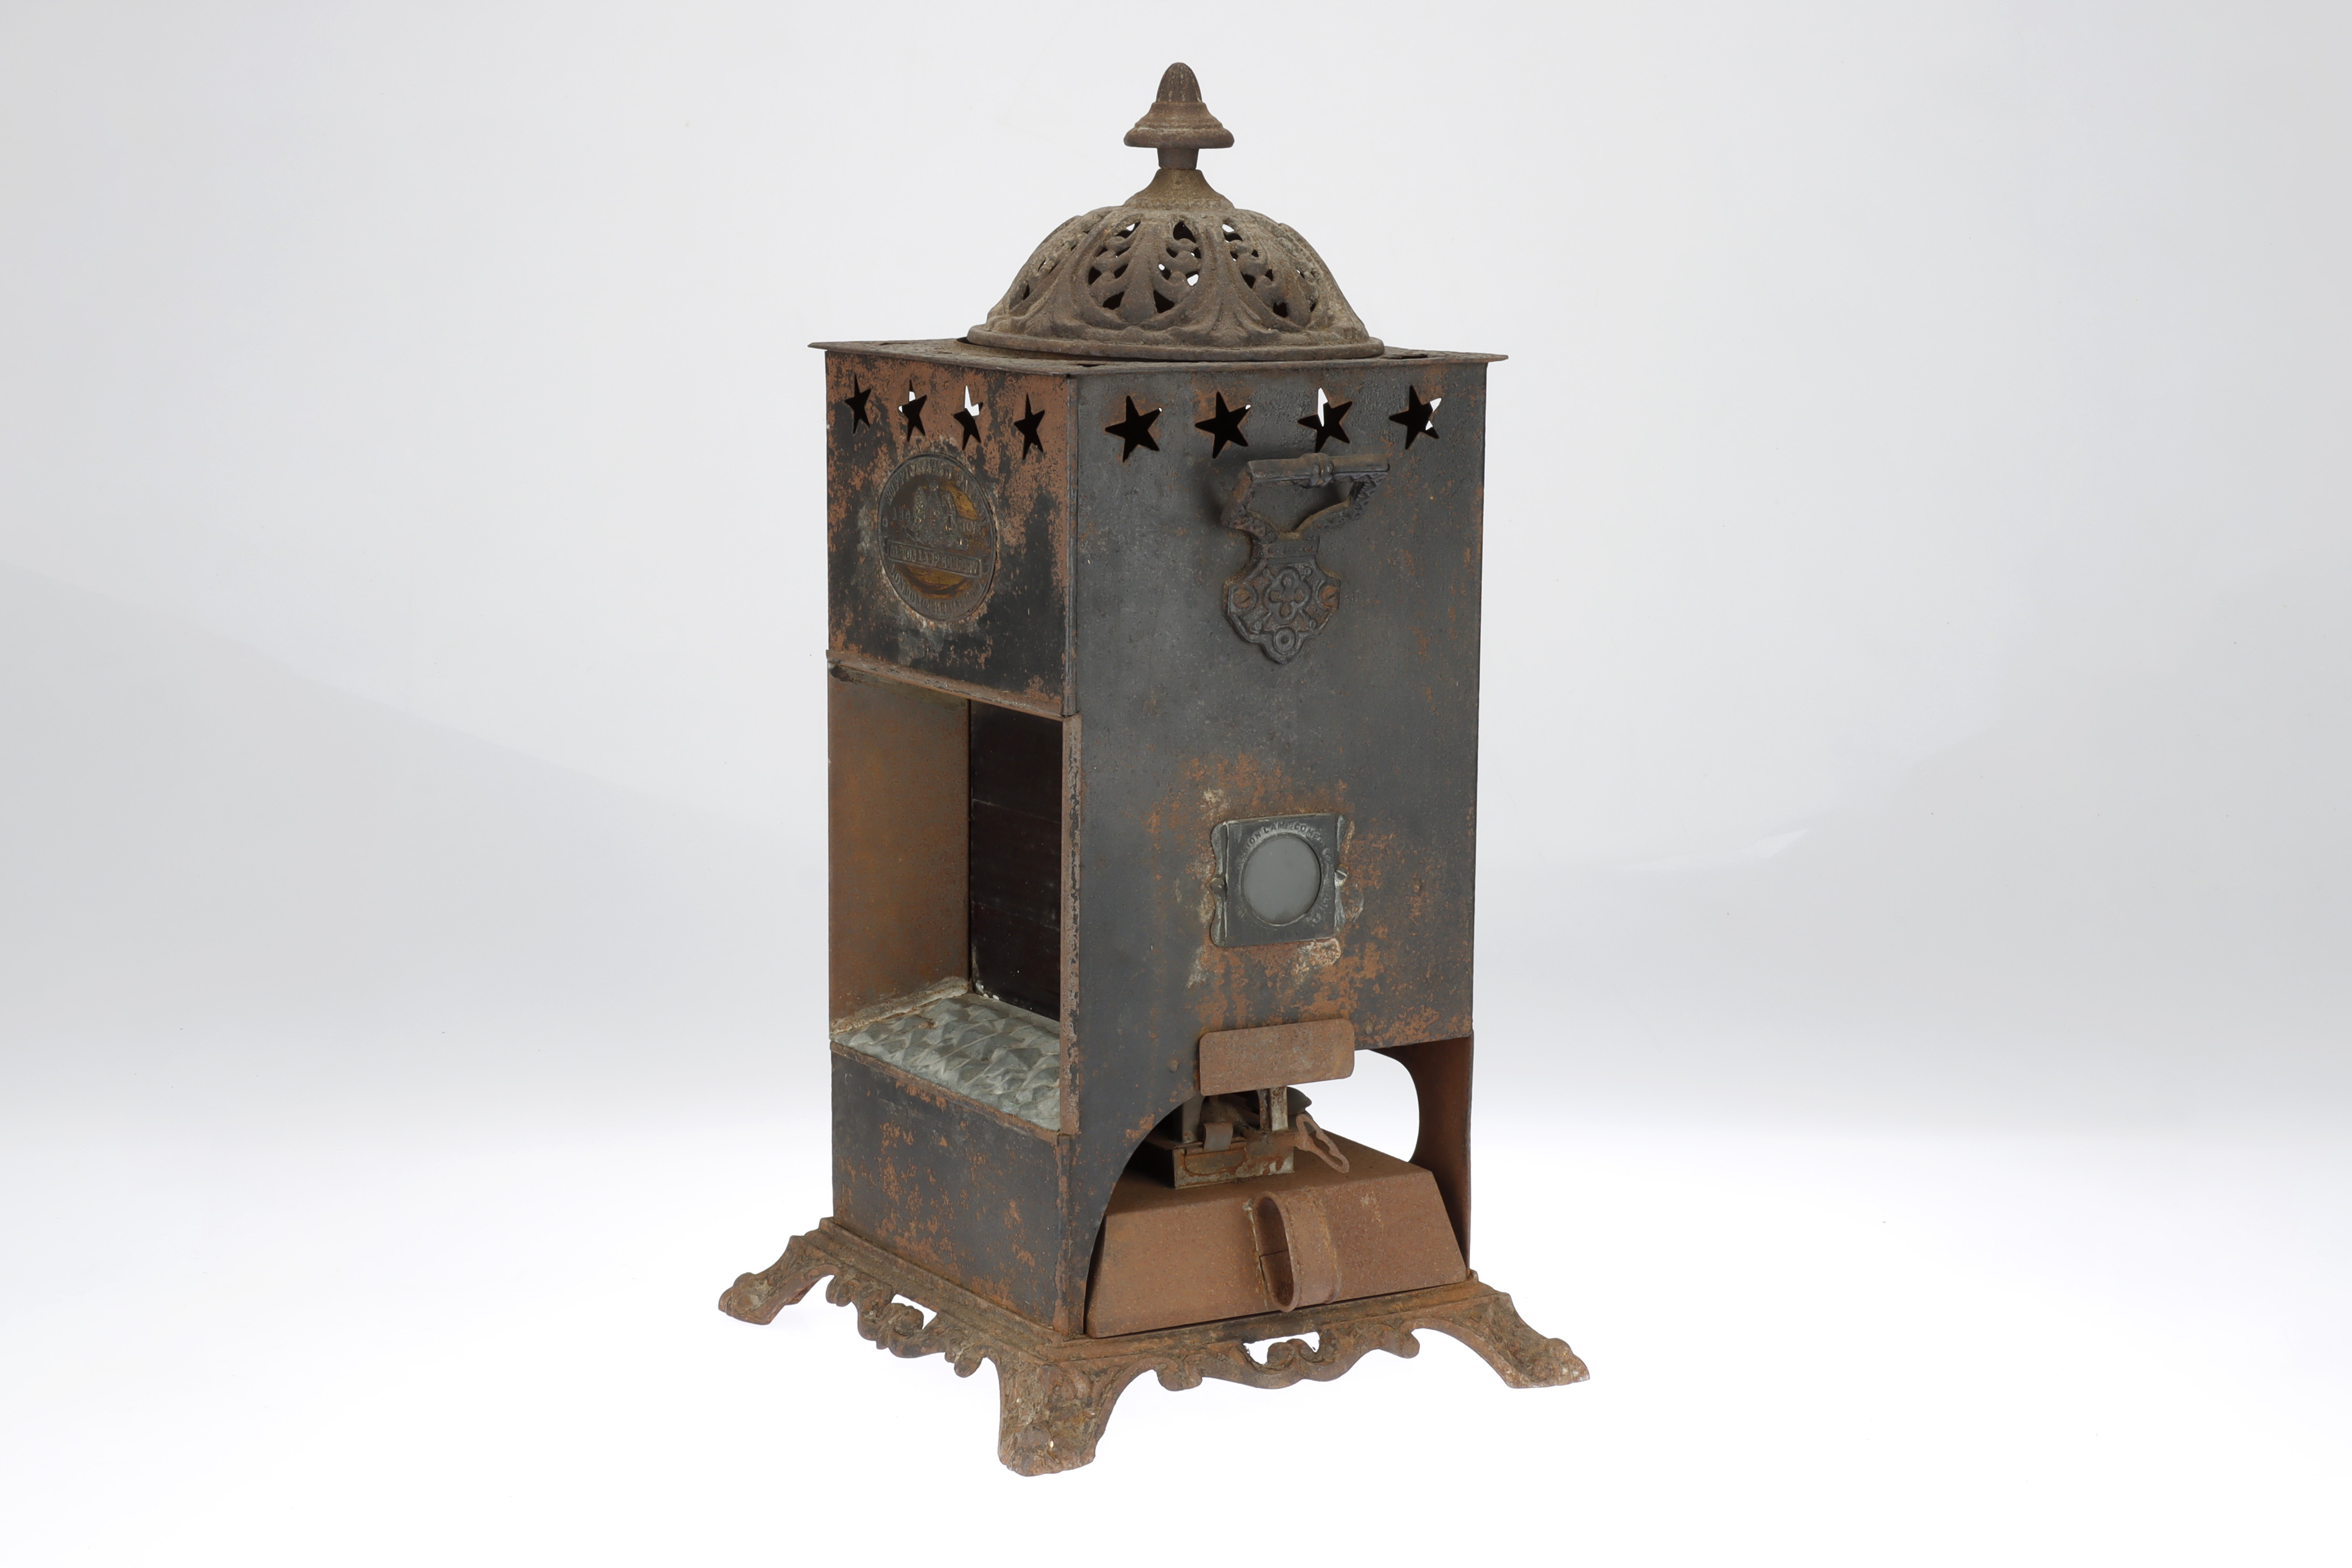 A Rippingille`s Patent Stove by the Albion Lamp Company,